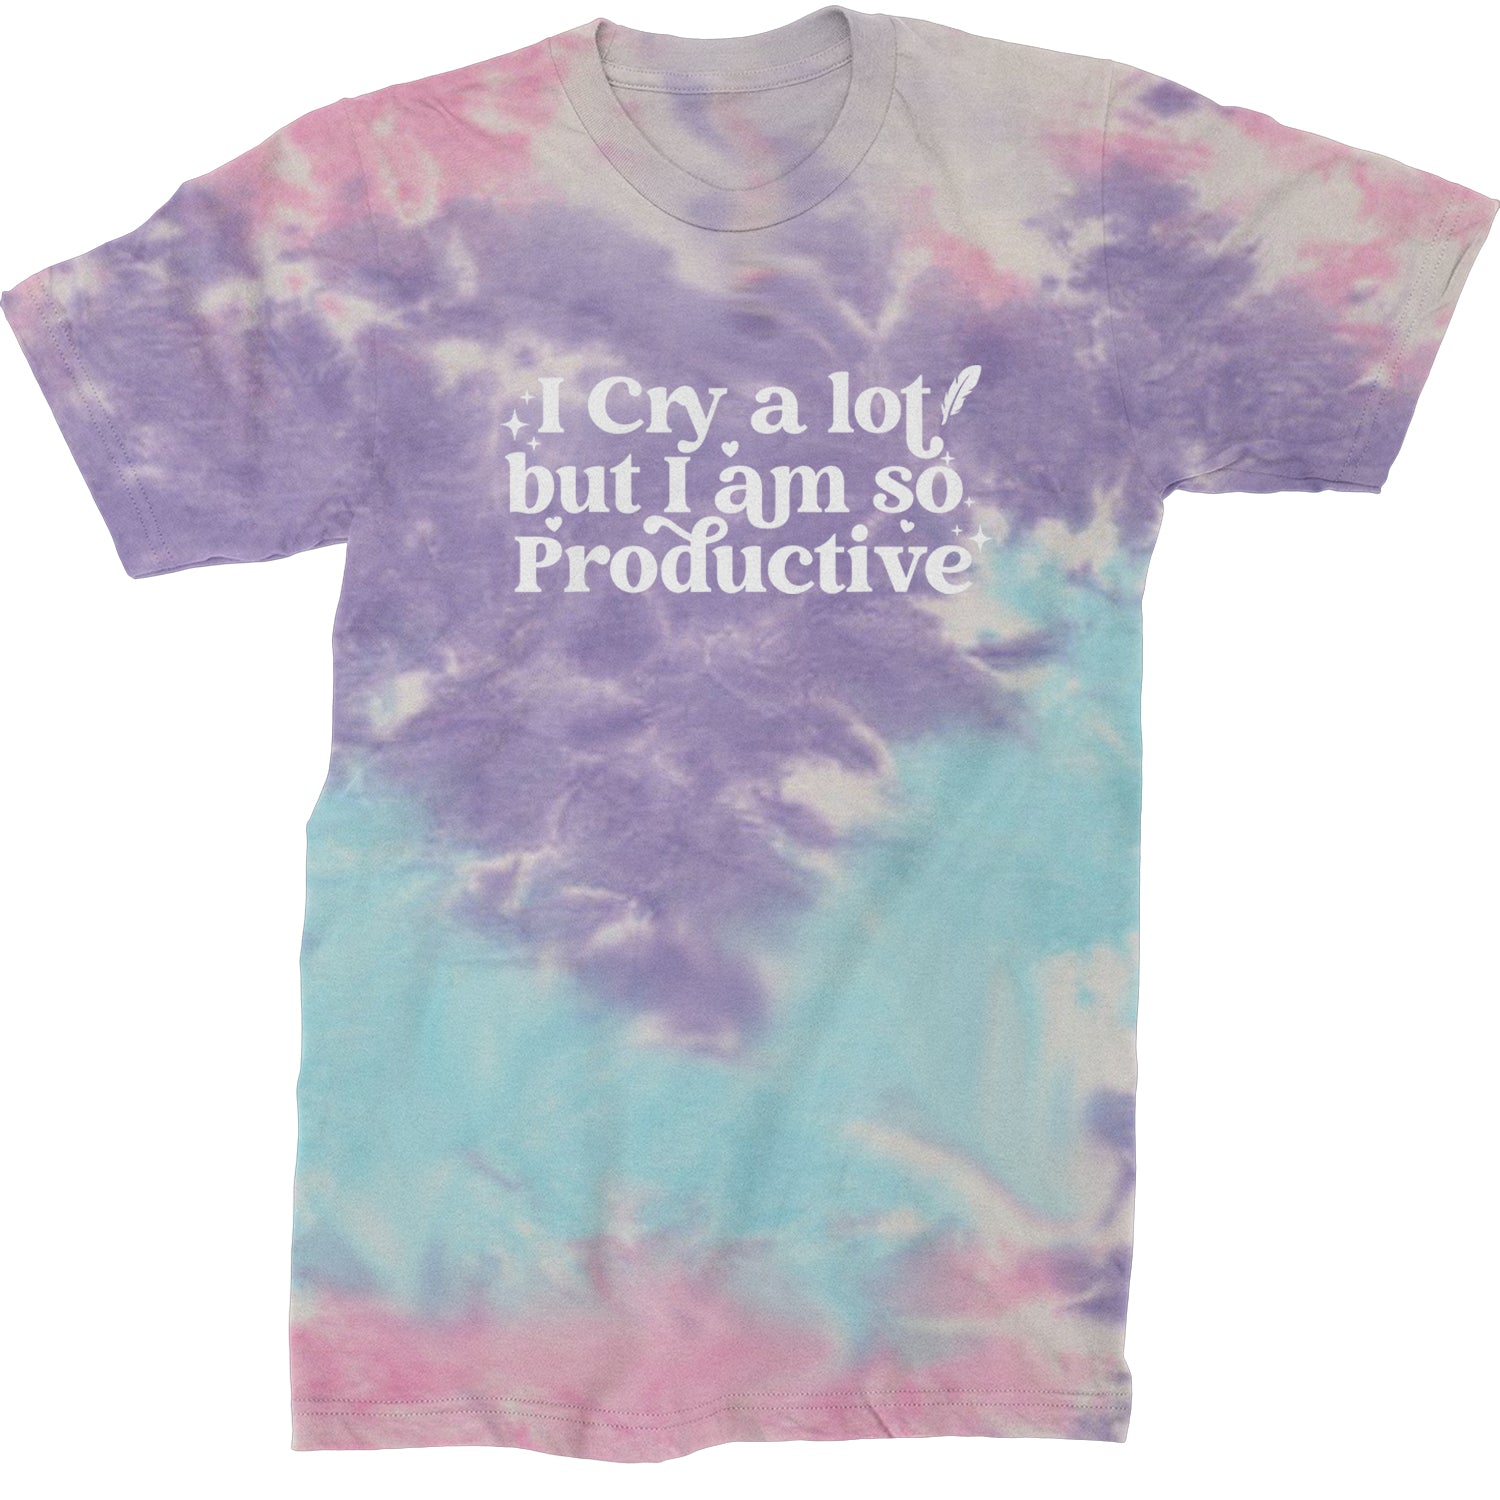 I Cry A Lot But I am So Productive TTPD Mens T-shirt Tie-Dye Cotton Candy